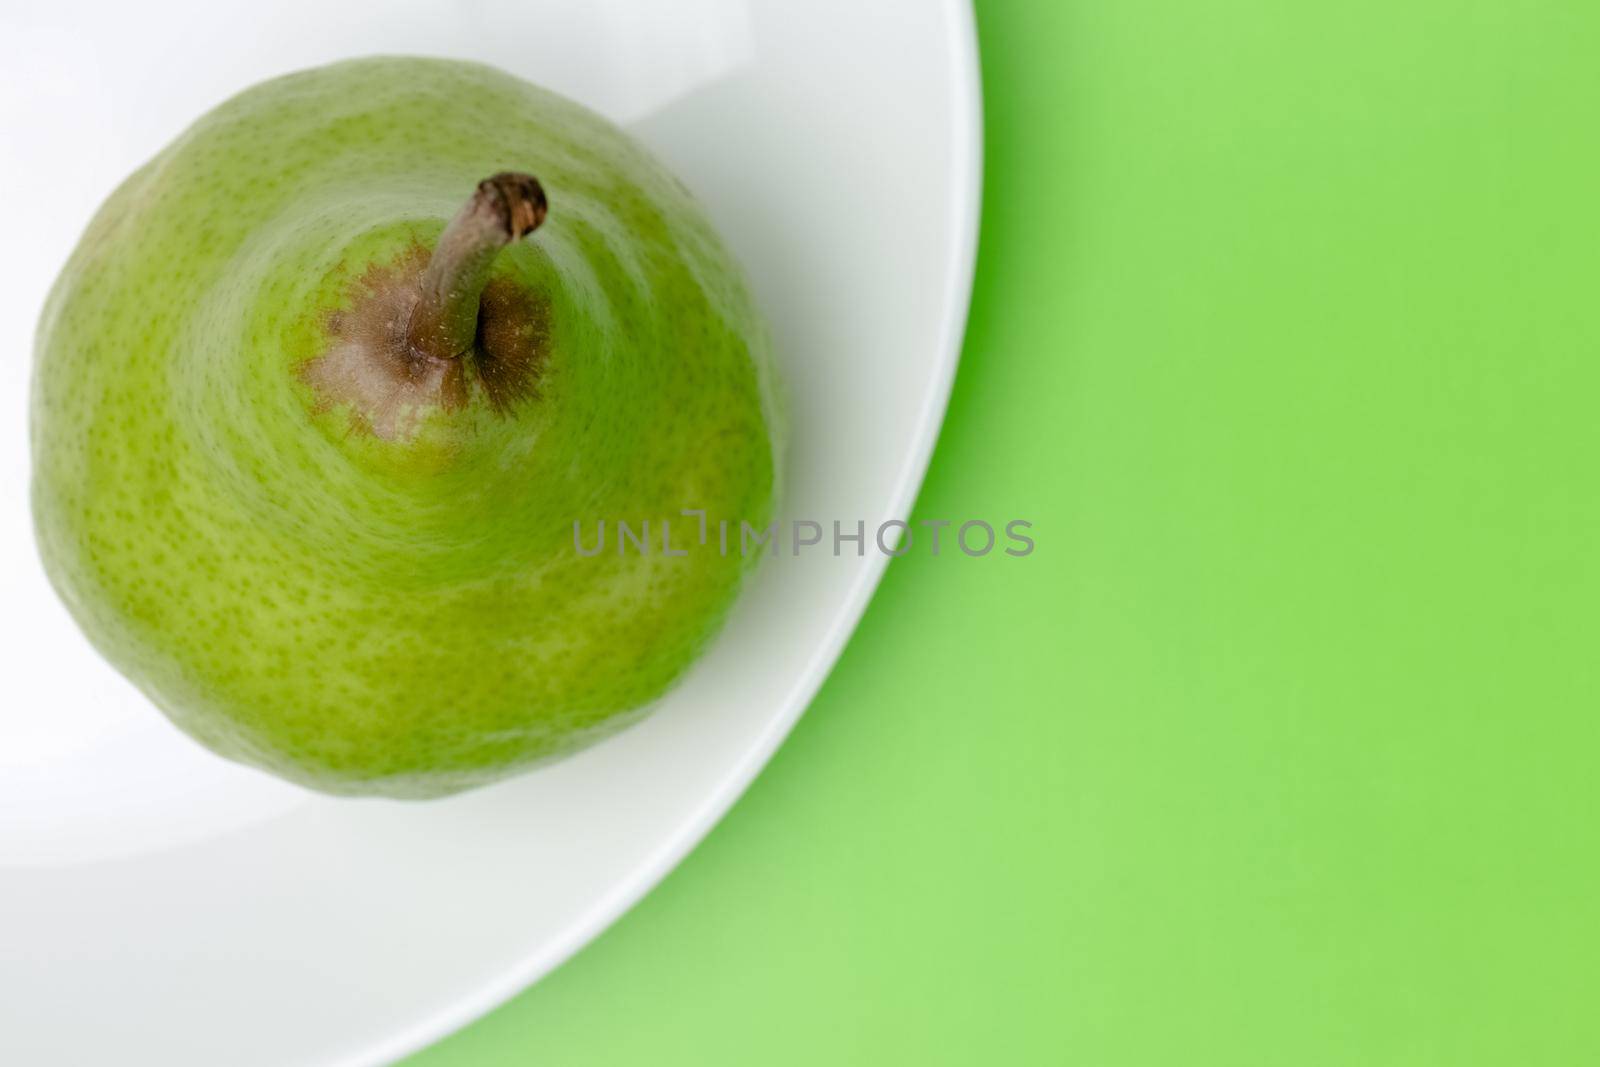 pear on a plate on a green background close-up by roman112007